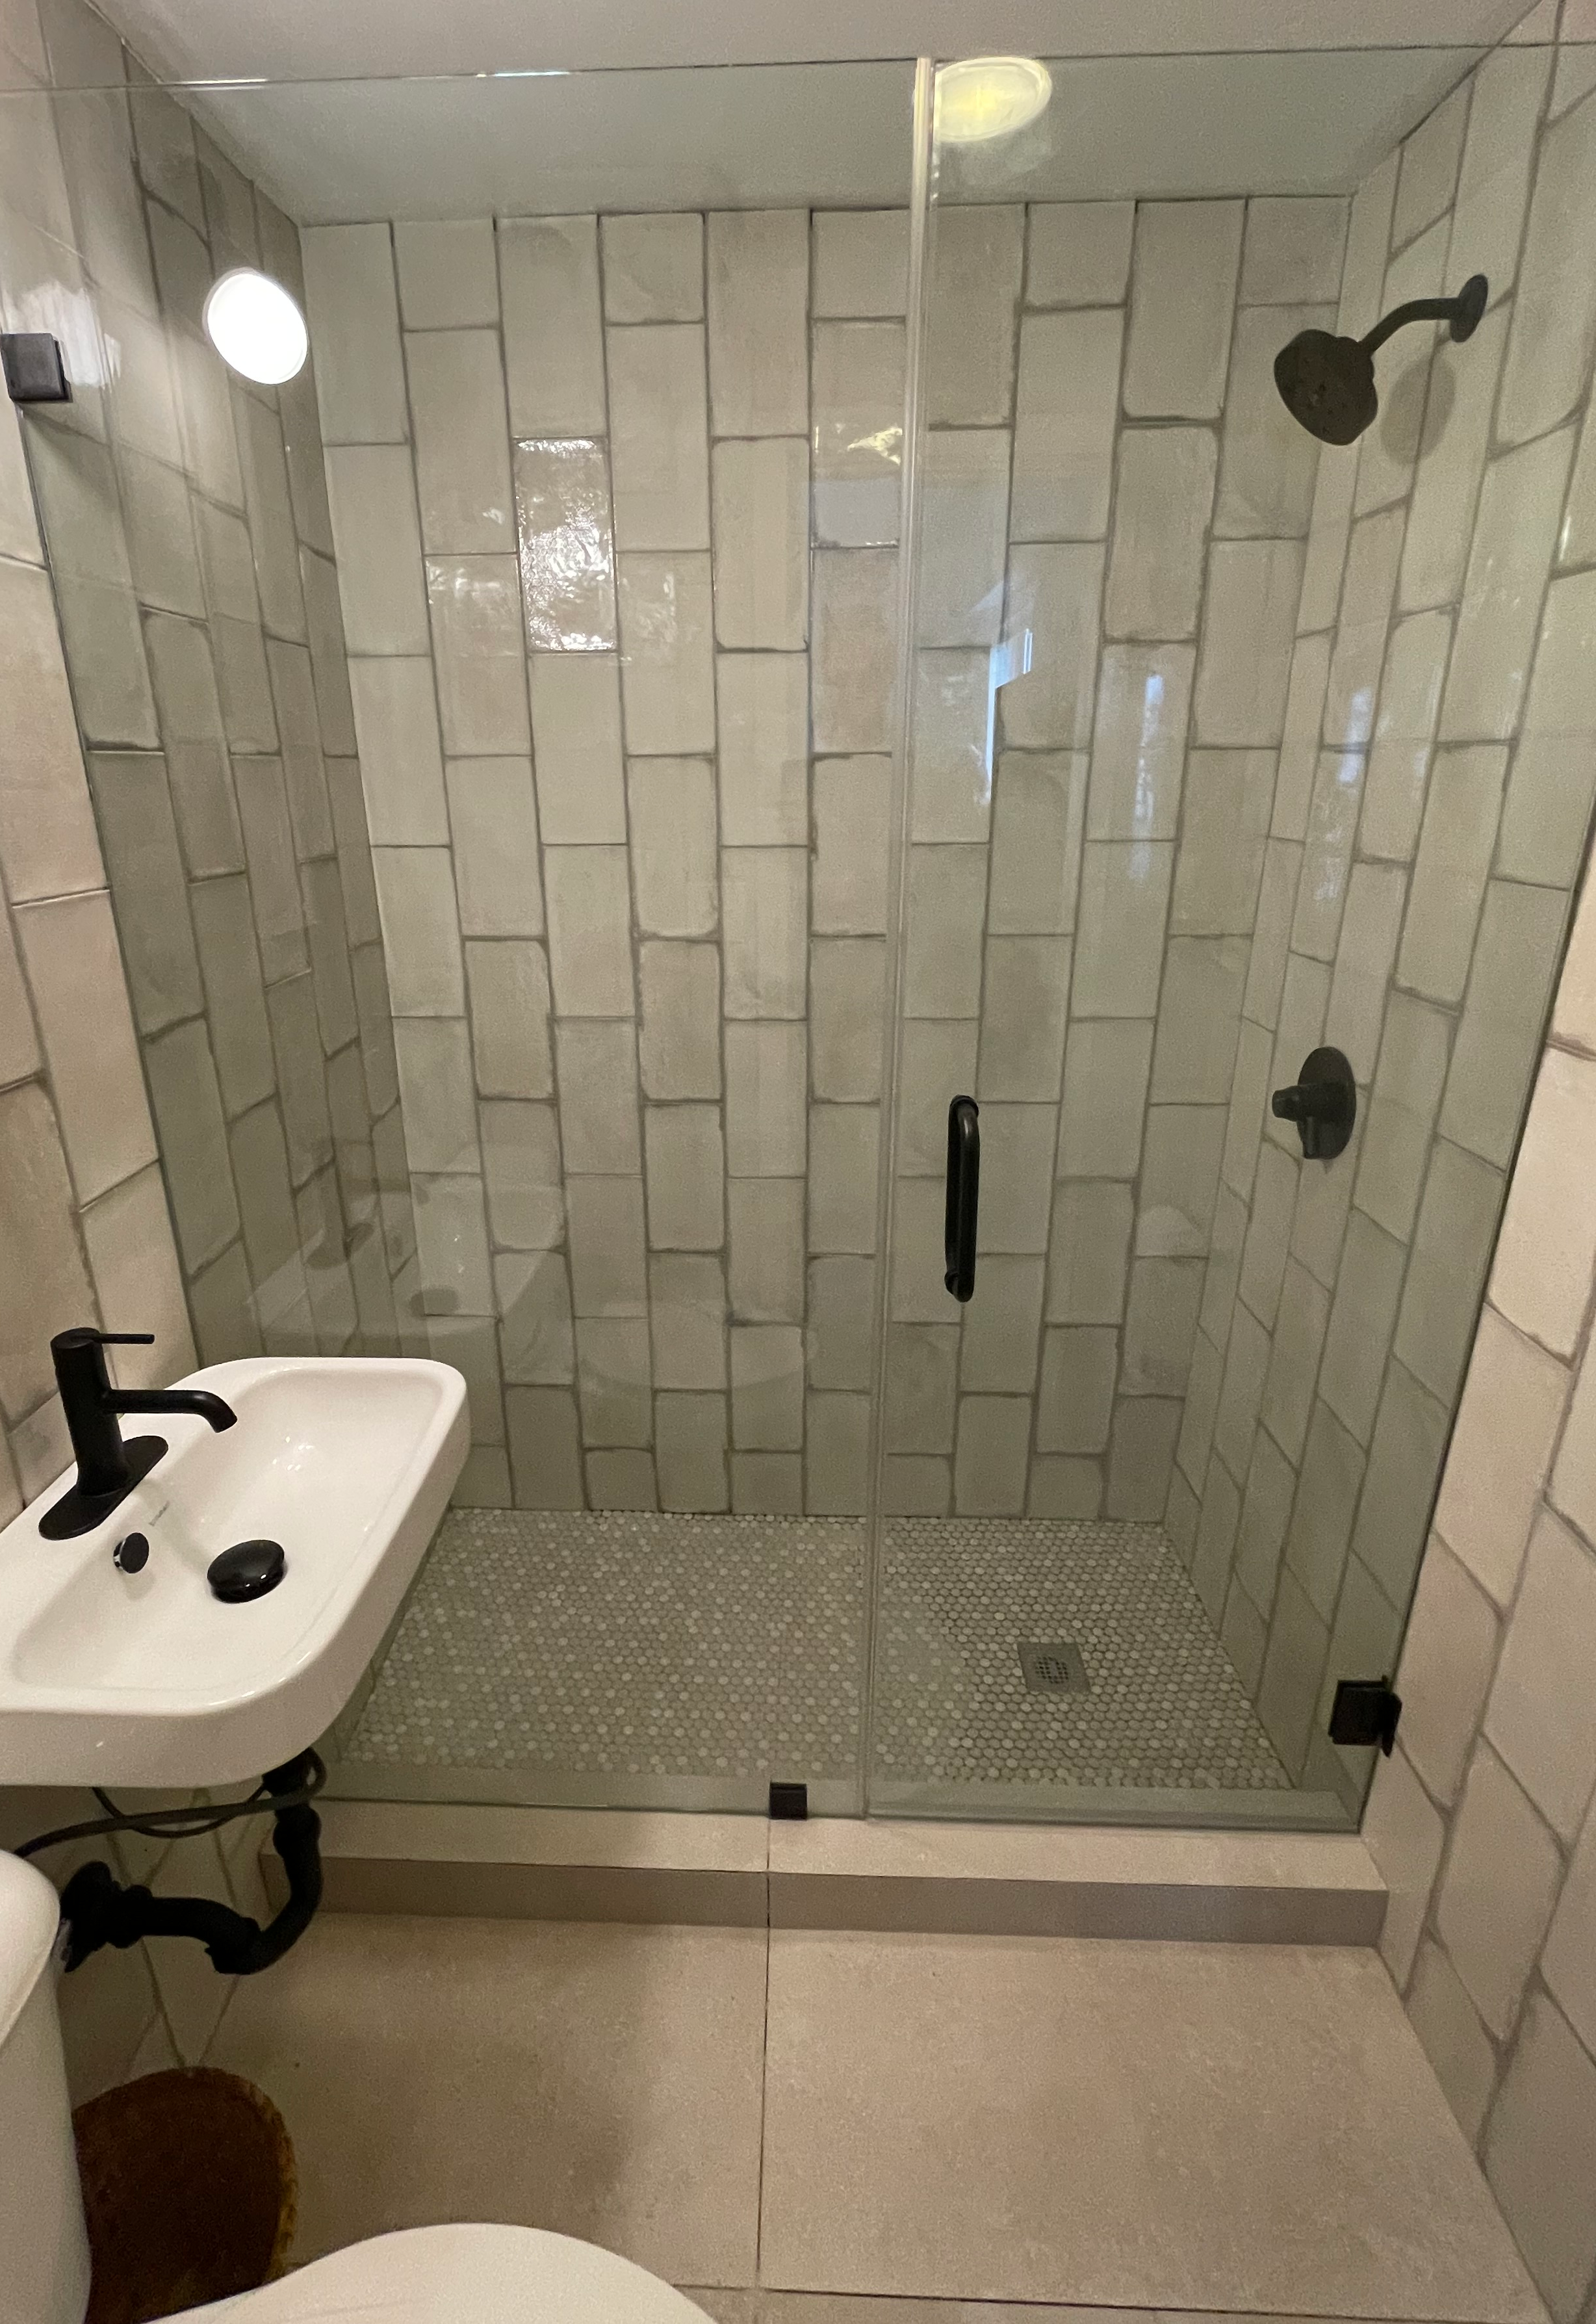 Transforming Spaces with Ceramic Tile and Black Accents